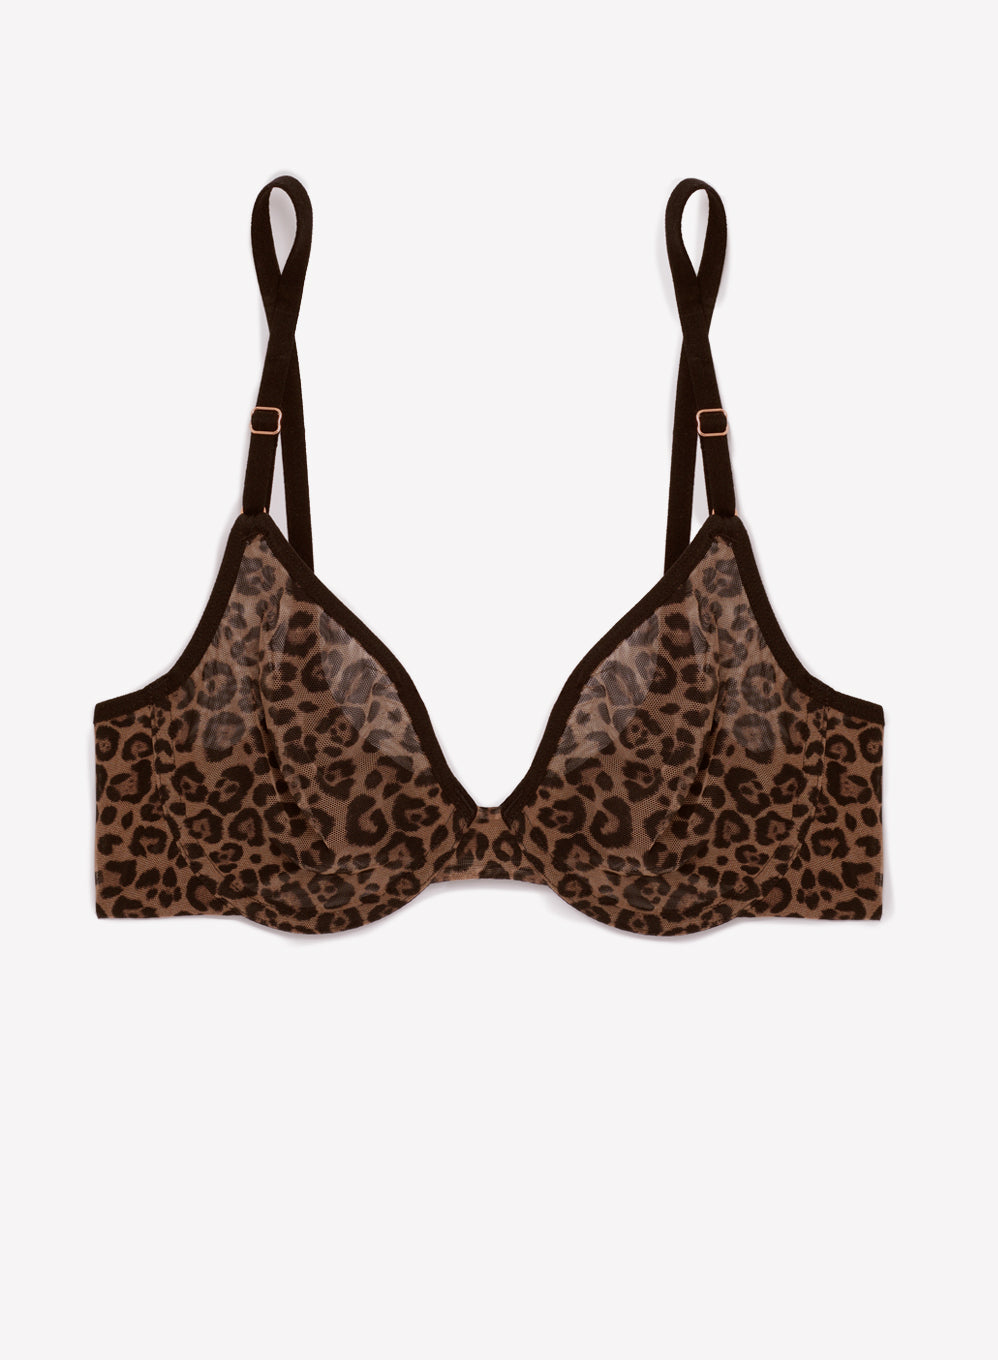 Leopard Print Mesh Bralette Animal Print Triangle Sheer Bra. Harness Bra  With Metal Front Closure and Silver Metal Rings. Bondage. BDSM. -   Canada